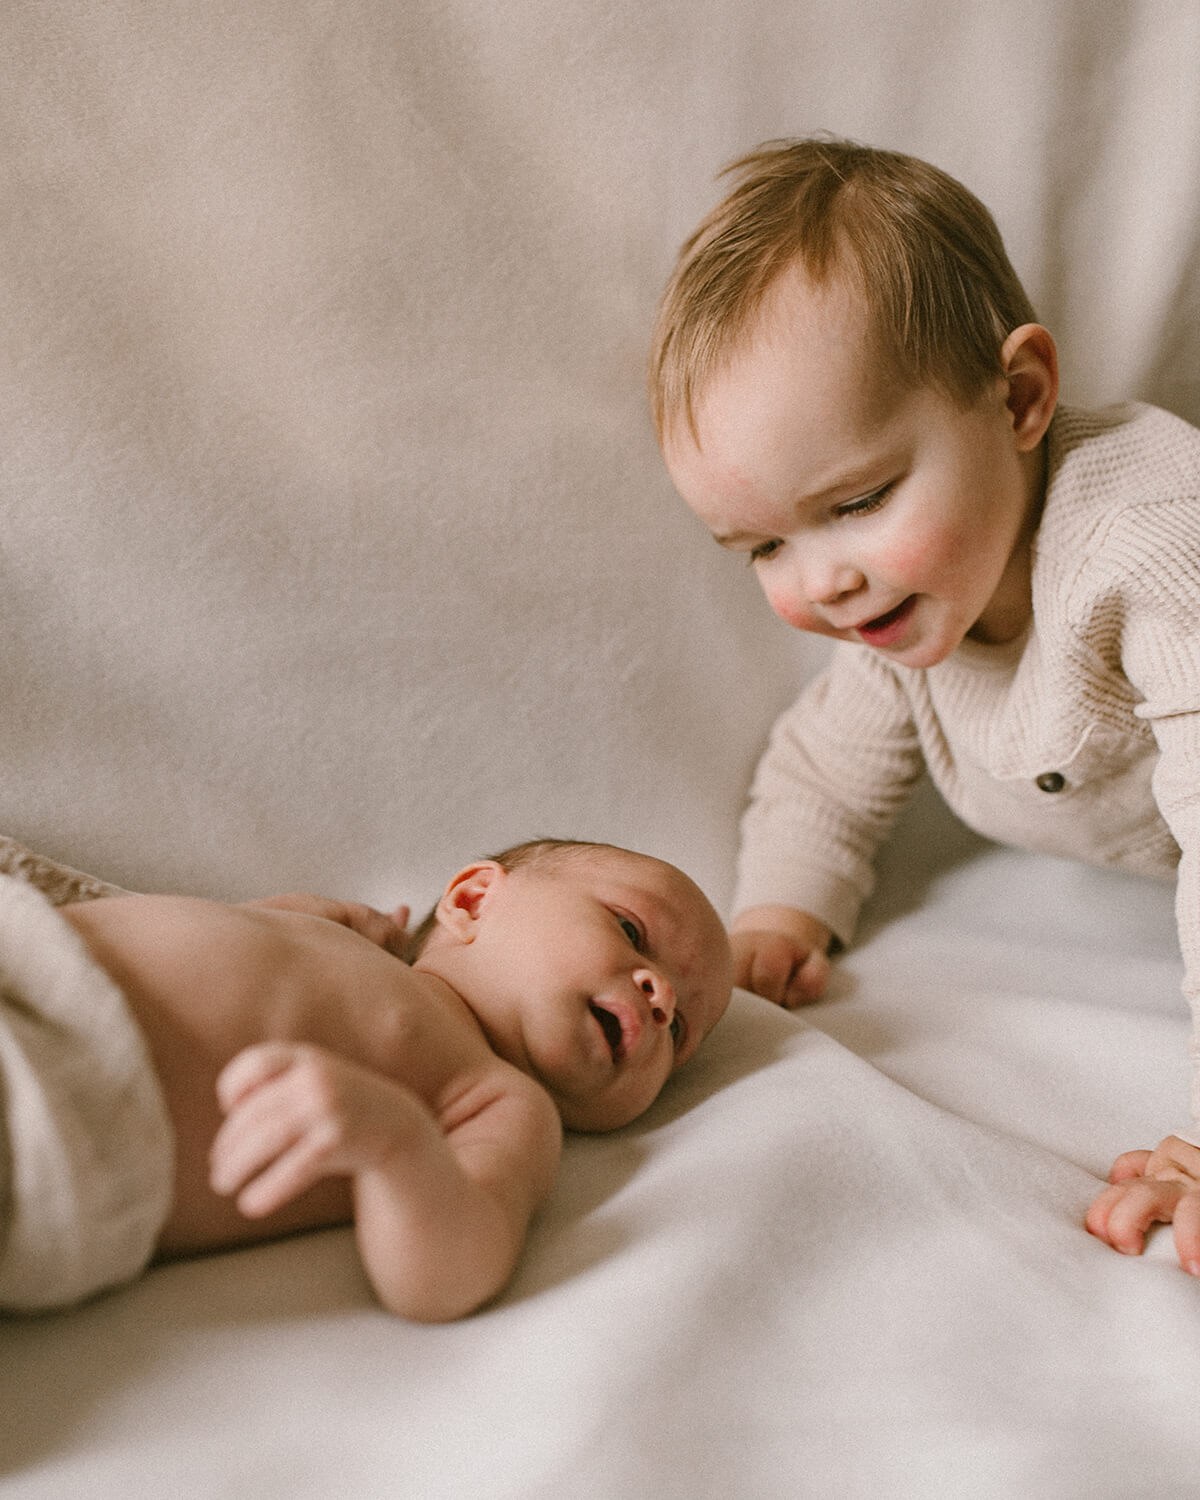 Newborn photography from Red Poppy in Reno, NV